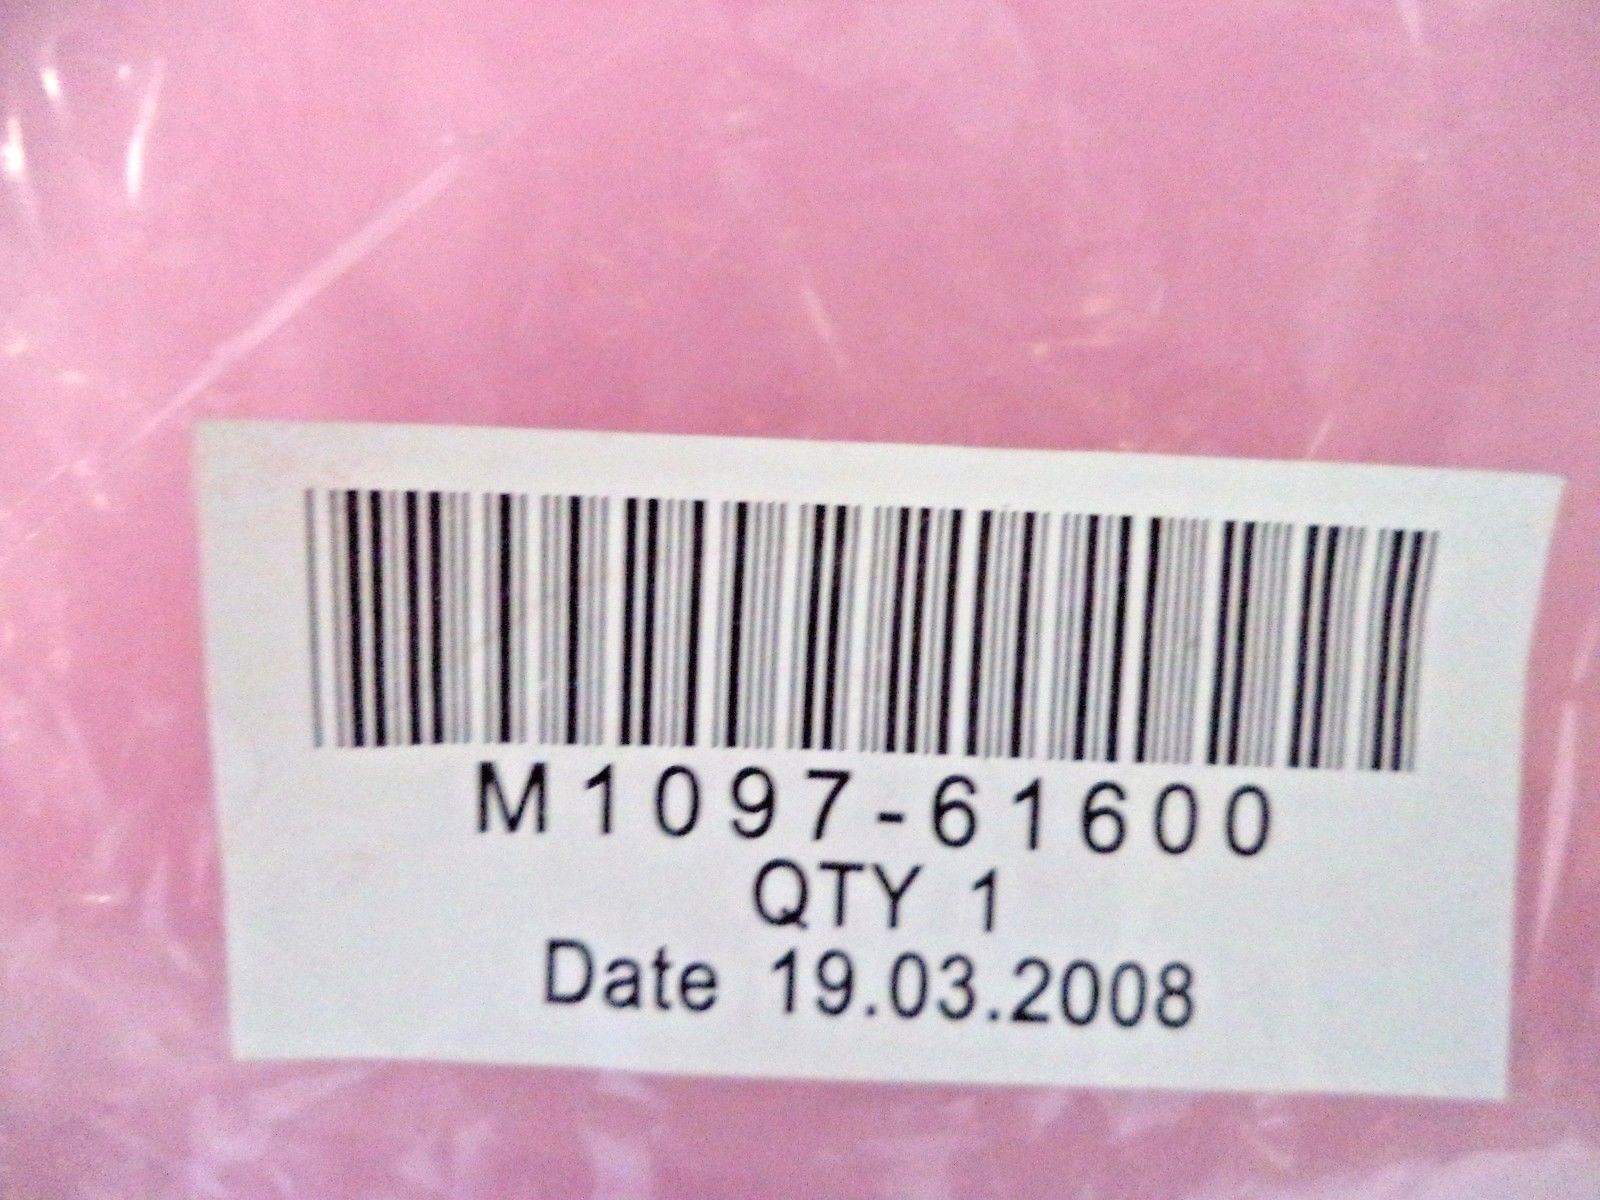 a label on a pink object with a barcode on it